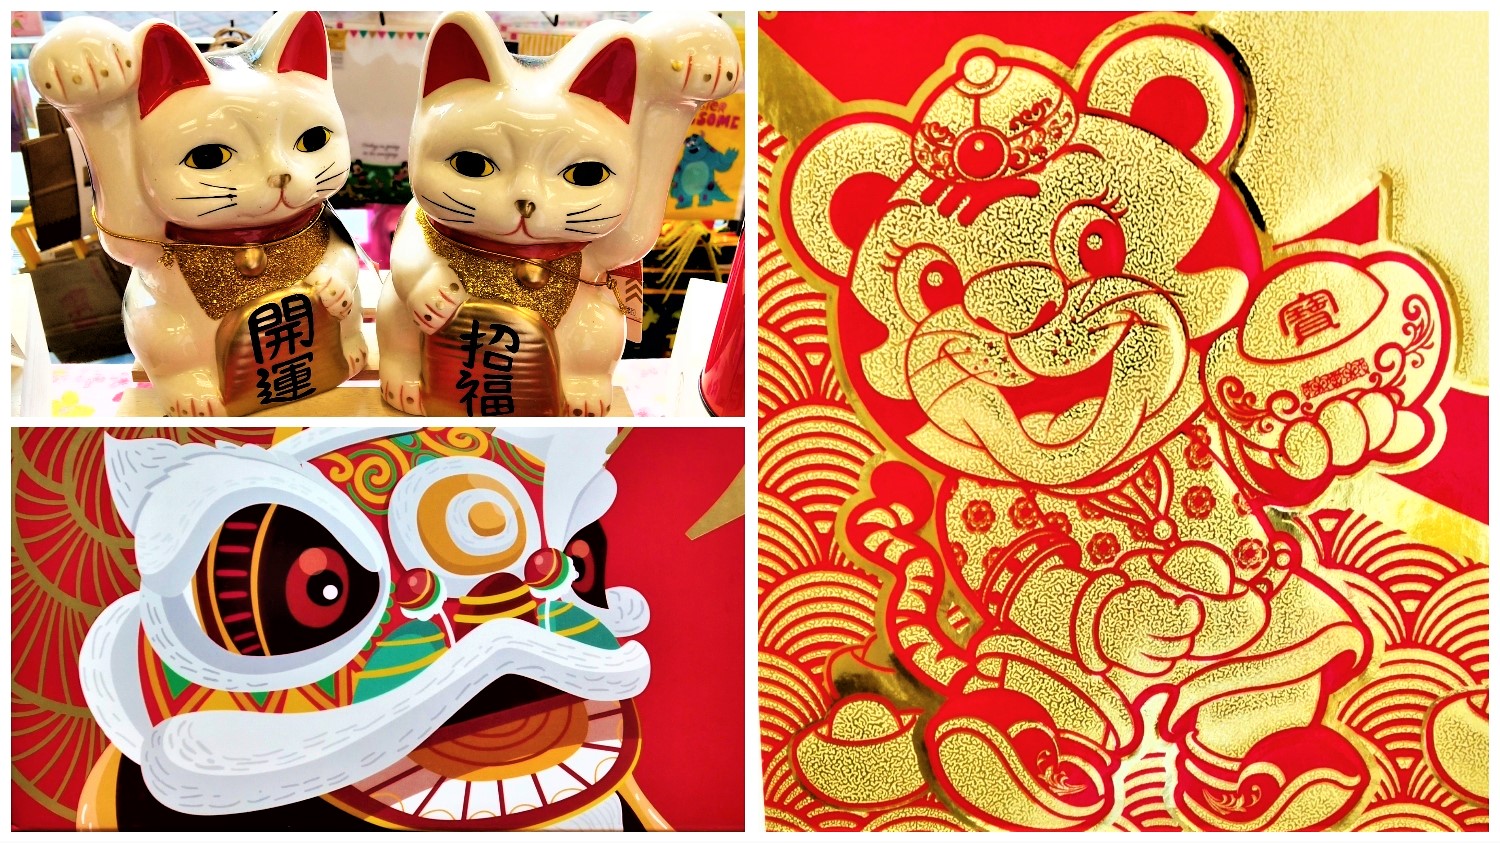 The cat family celebrates the Year of the Tiger